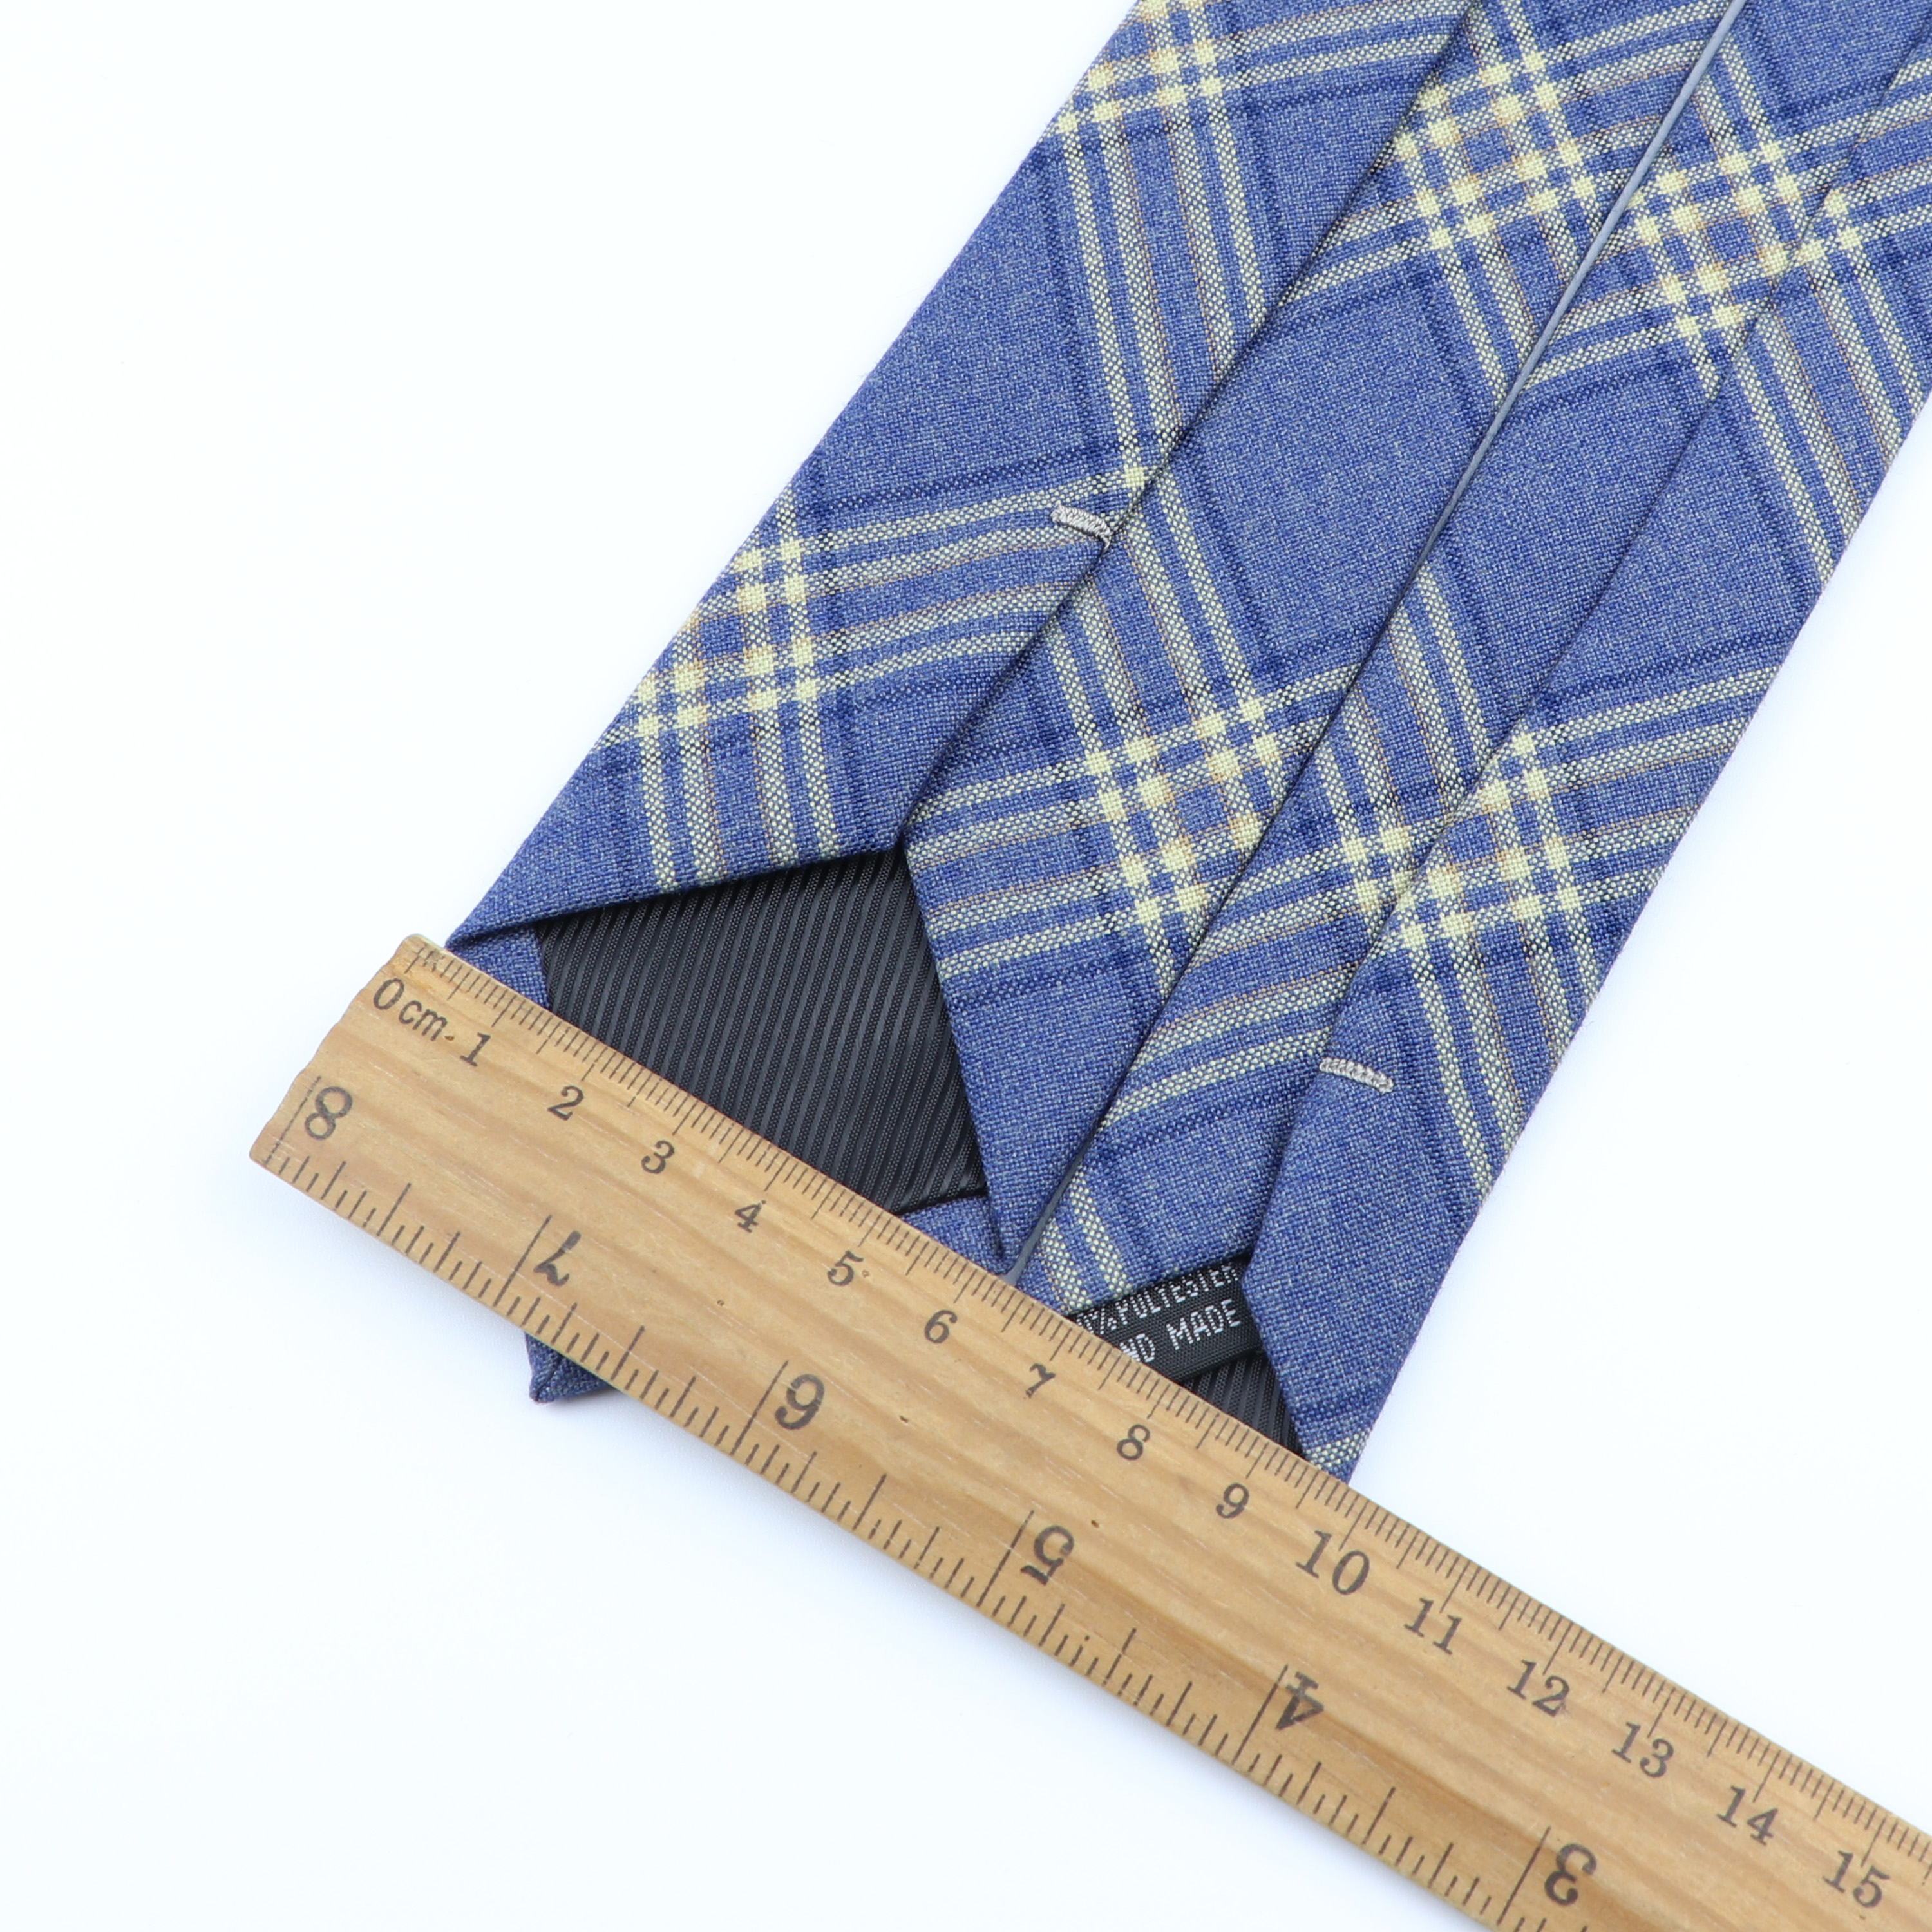 New Soft TR Fabric Polyester Ties For Men Skinny Plaid Business Tie Wedding Dress Butterfly Designer Daily Neckwear Accessories